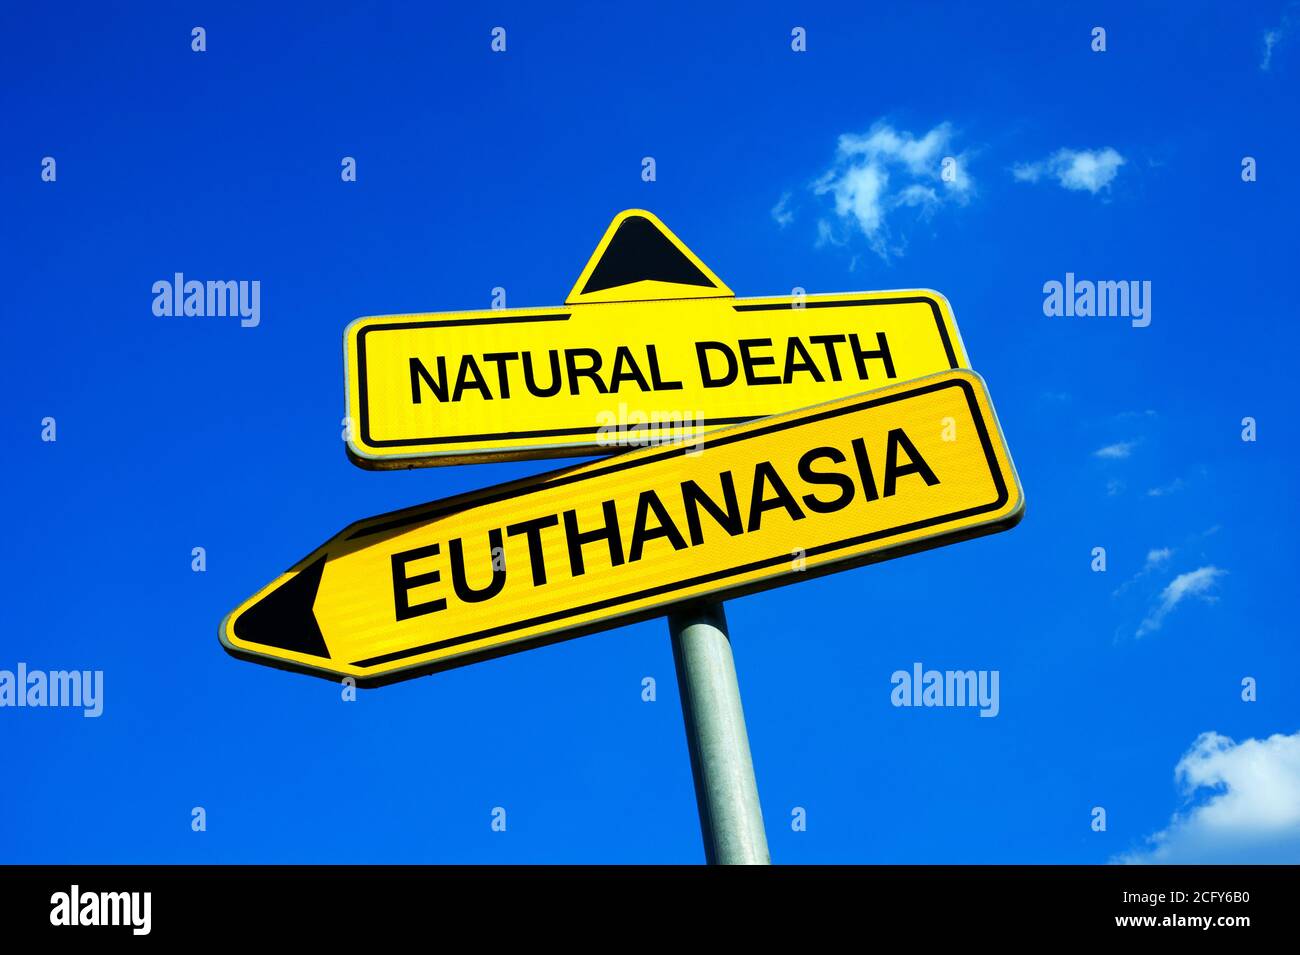 Natural Death or Euthanasia - Traffic sign with two options - deciding between assisted death and suffering because of incurable disease or illness. Q Stock Photo